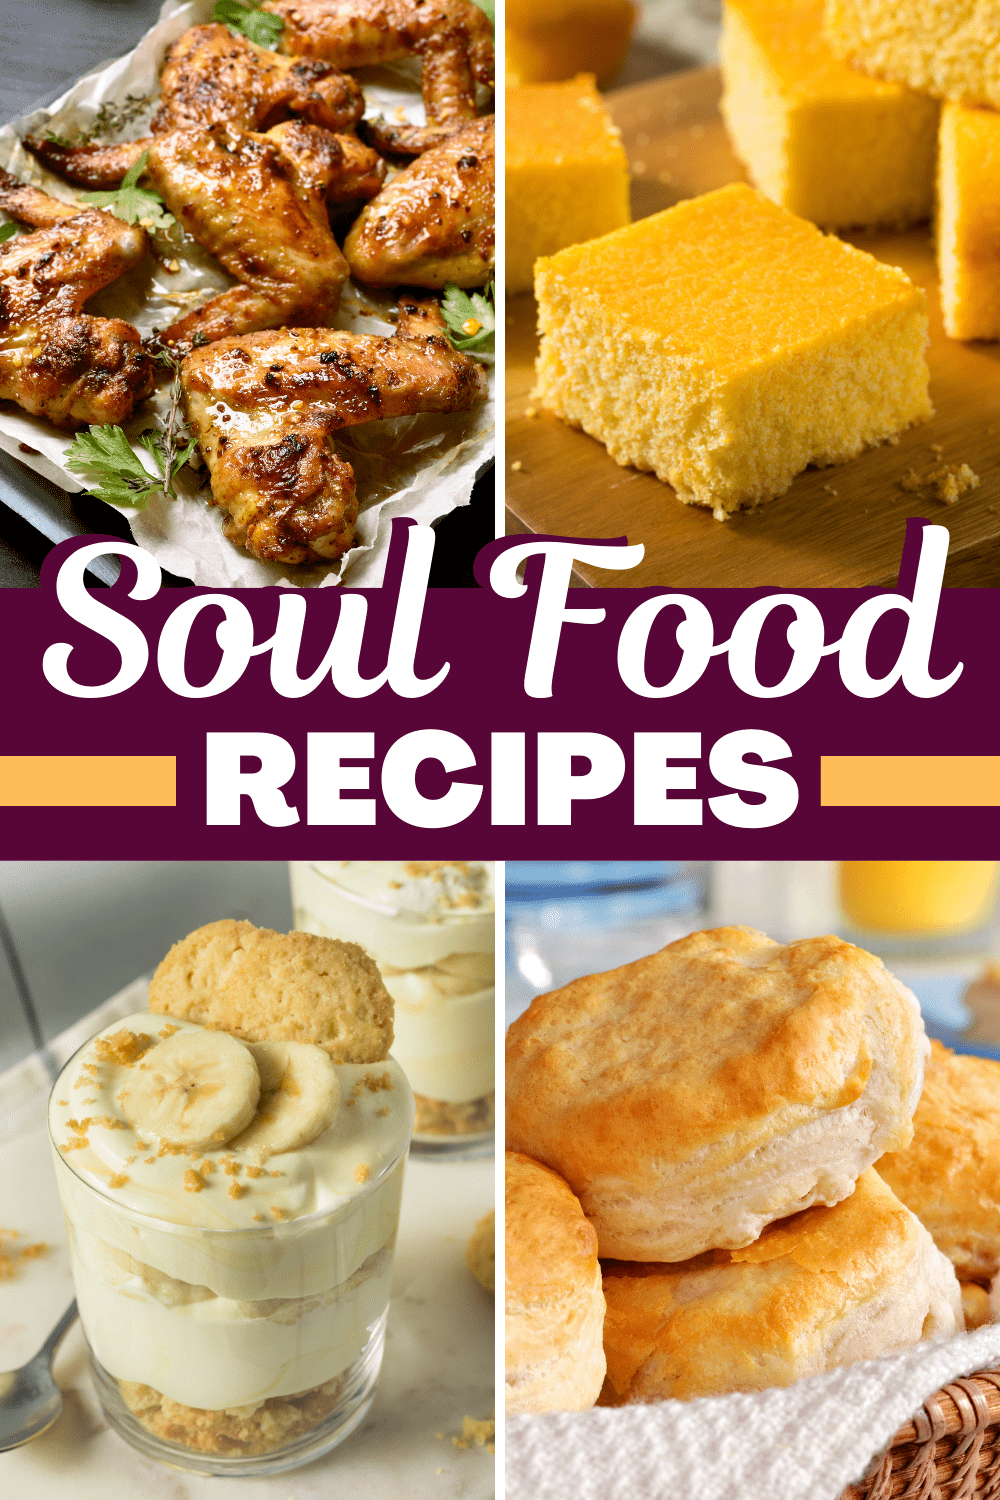 What are some traditional soul food dishes?